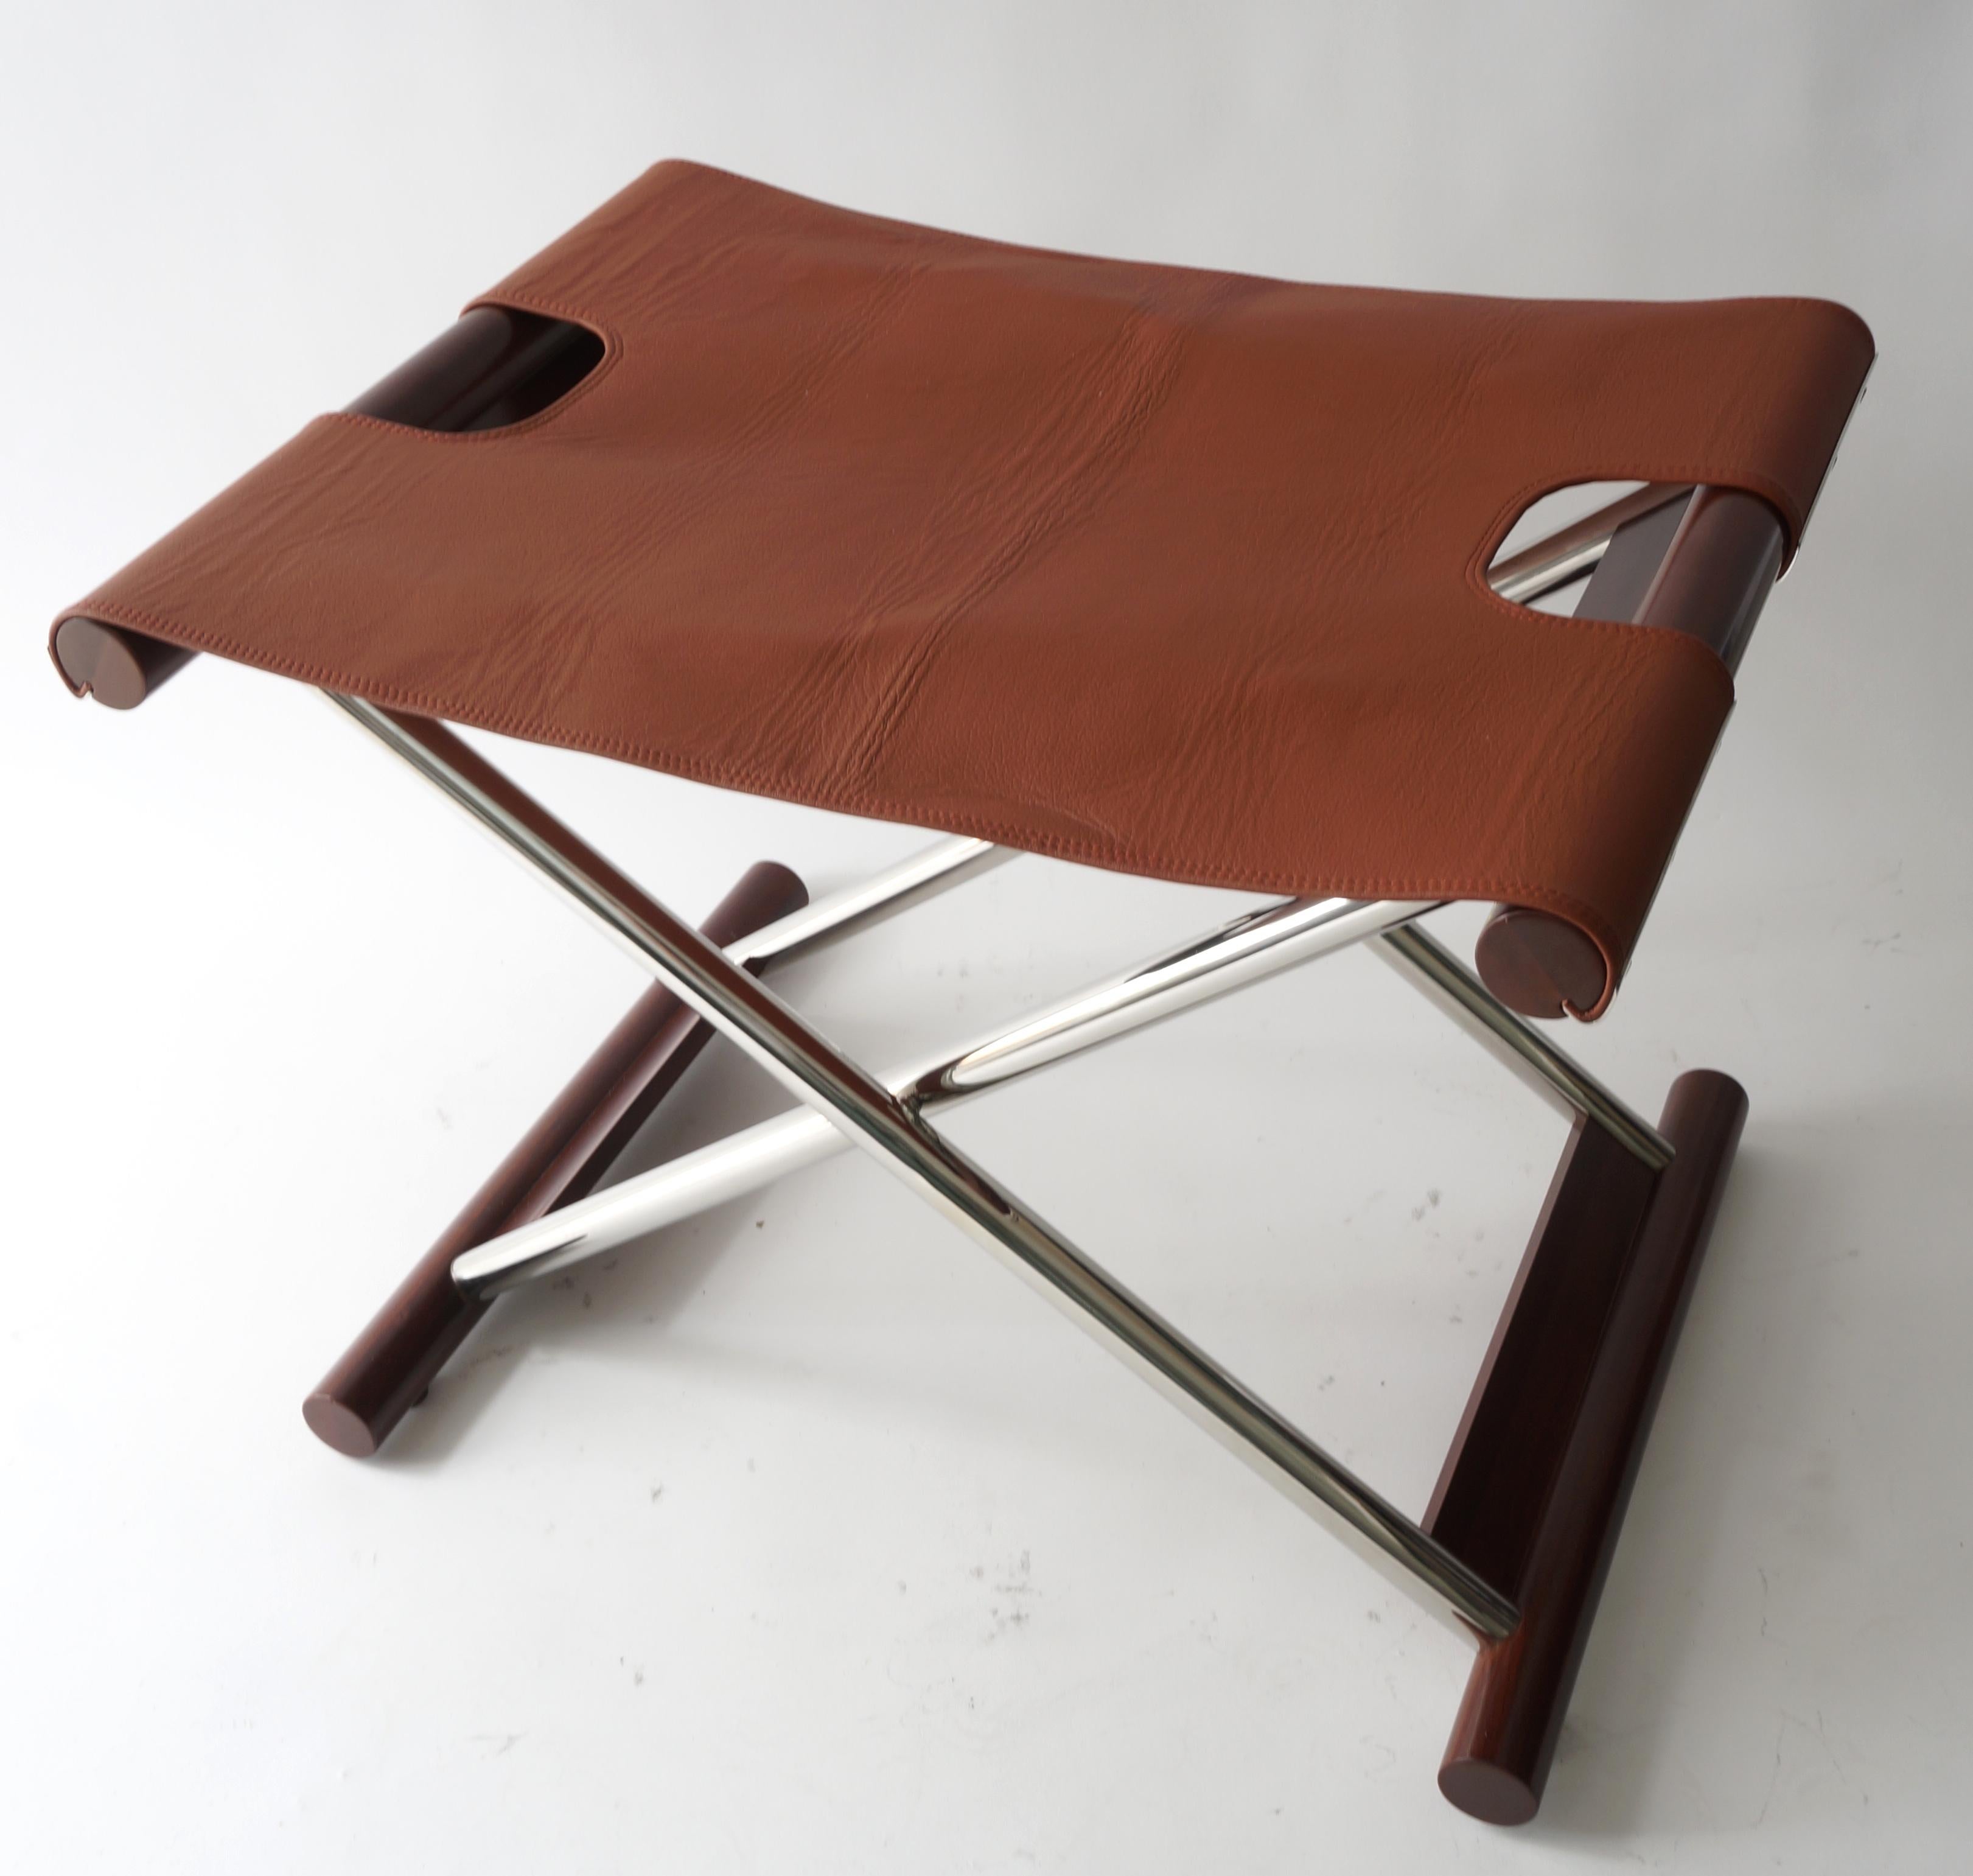 Vintage folding X-Sling stool in leather polished stainless steel and mahogany from a Palm Beach estate.

size when opened is 23 wide, 17.5 deep, and 19